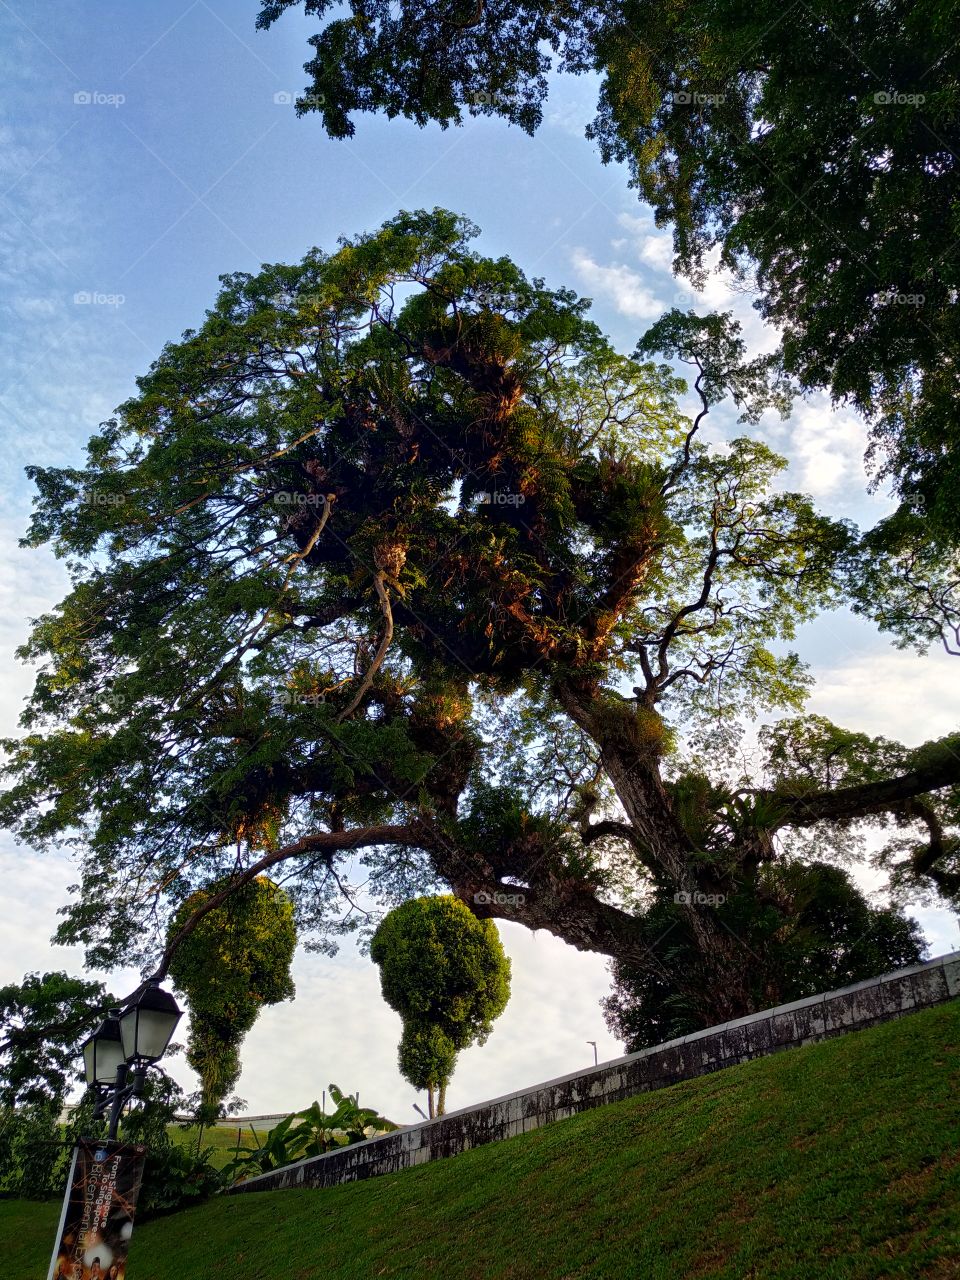 Fort Canning Park, Singapore.